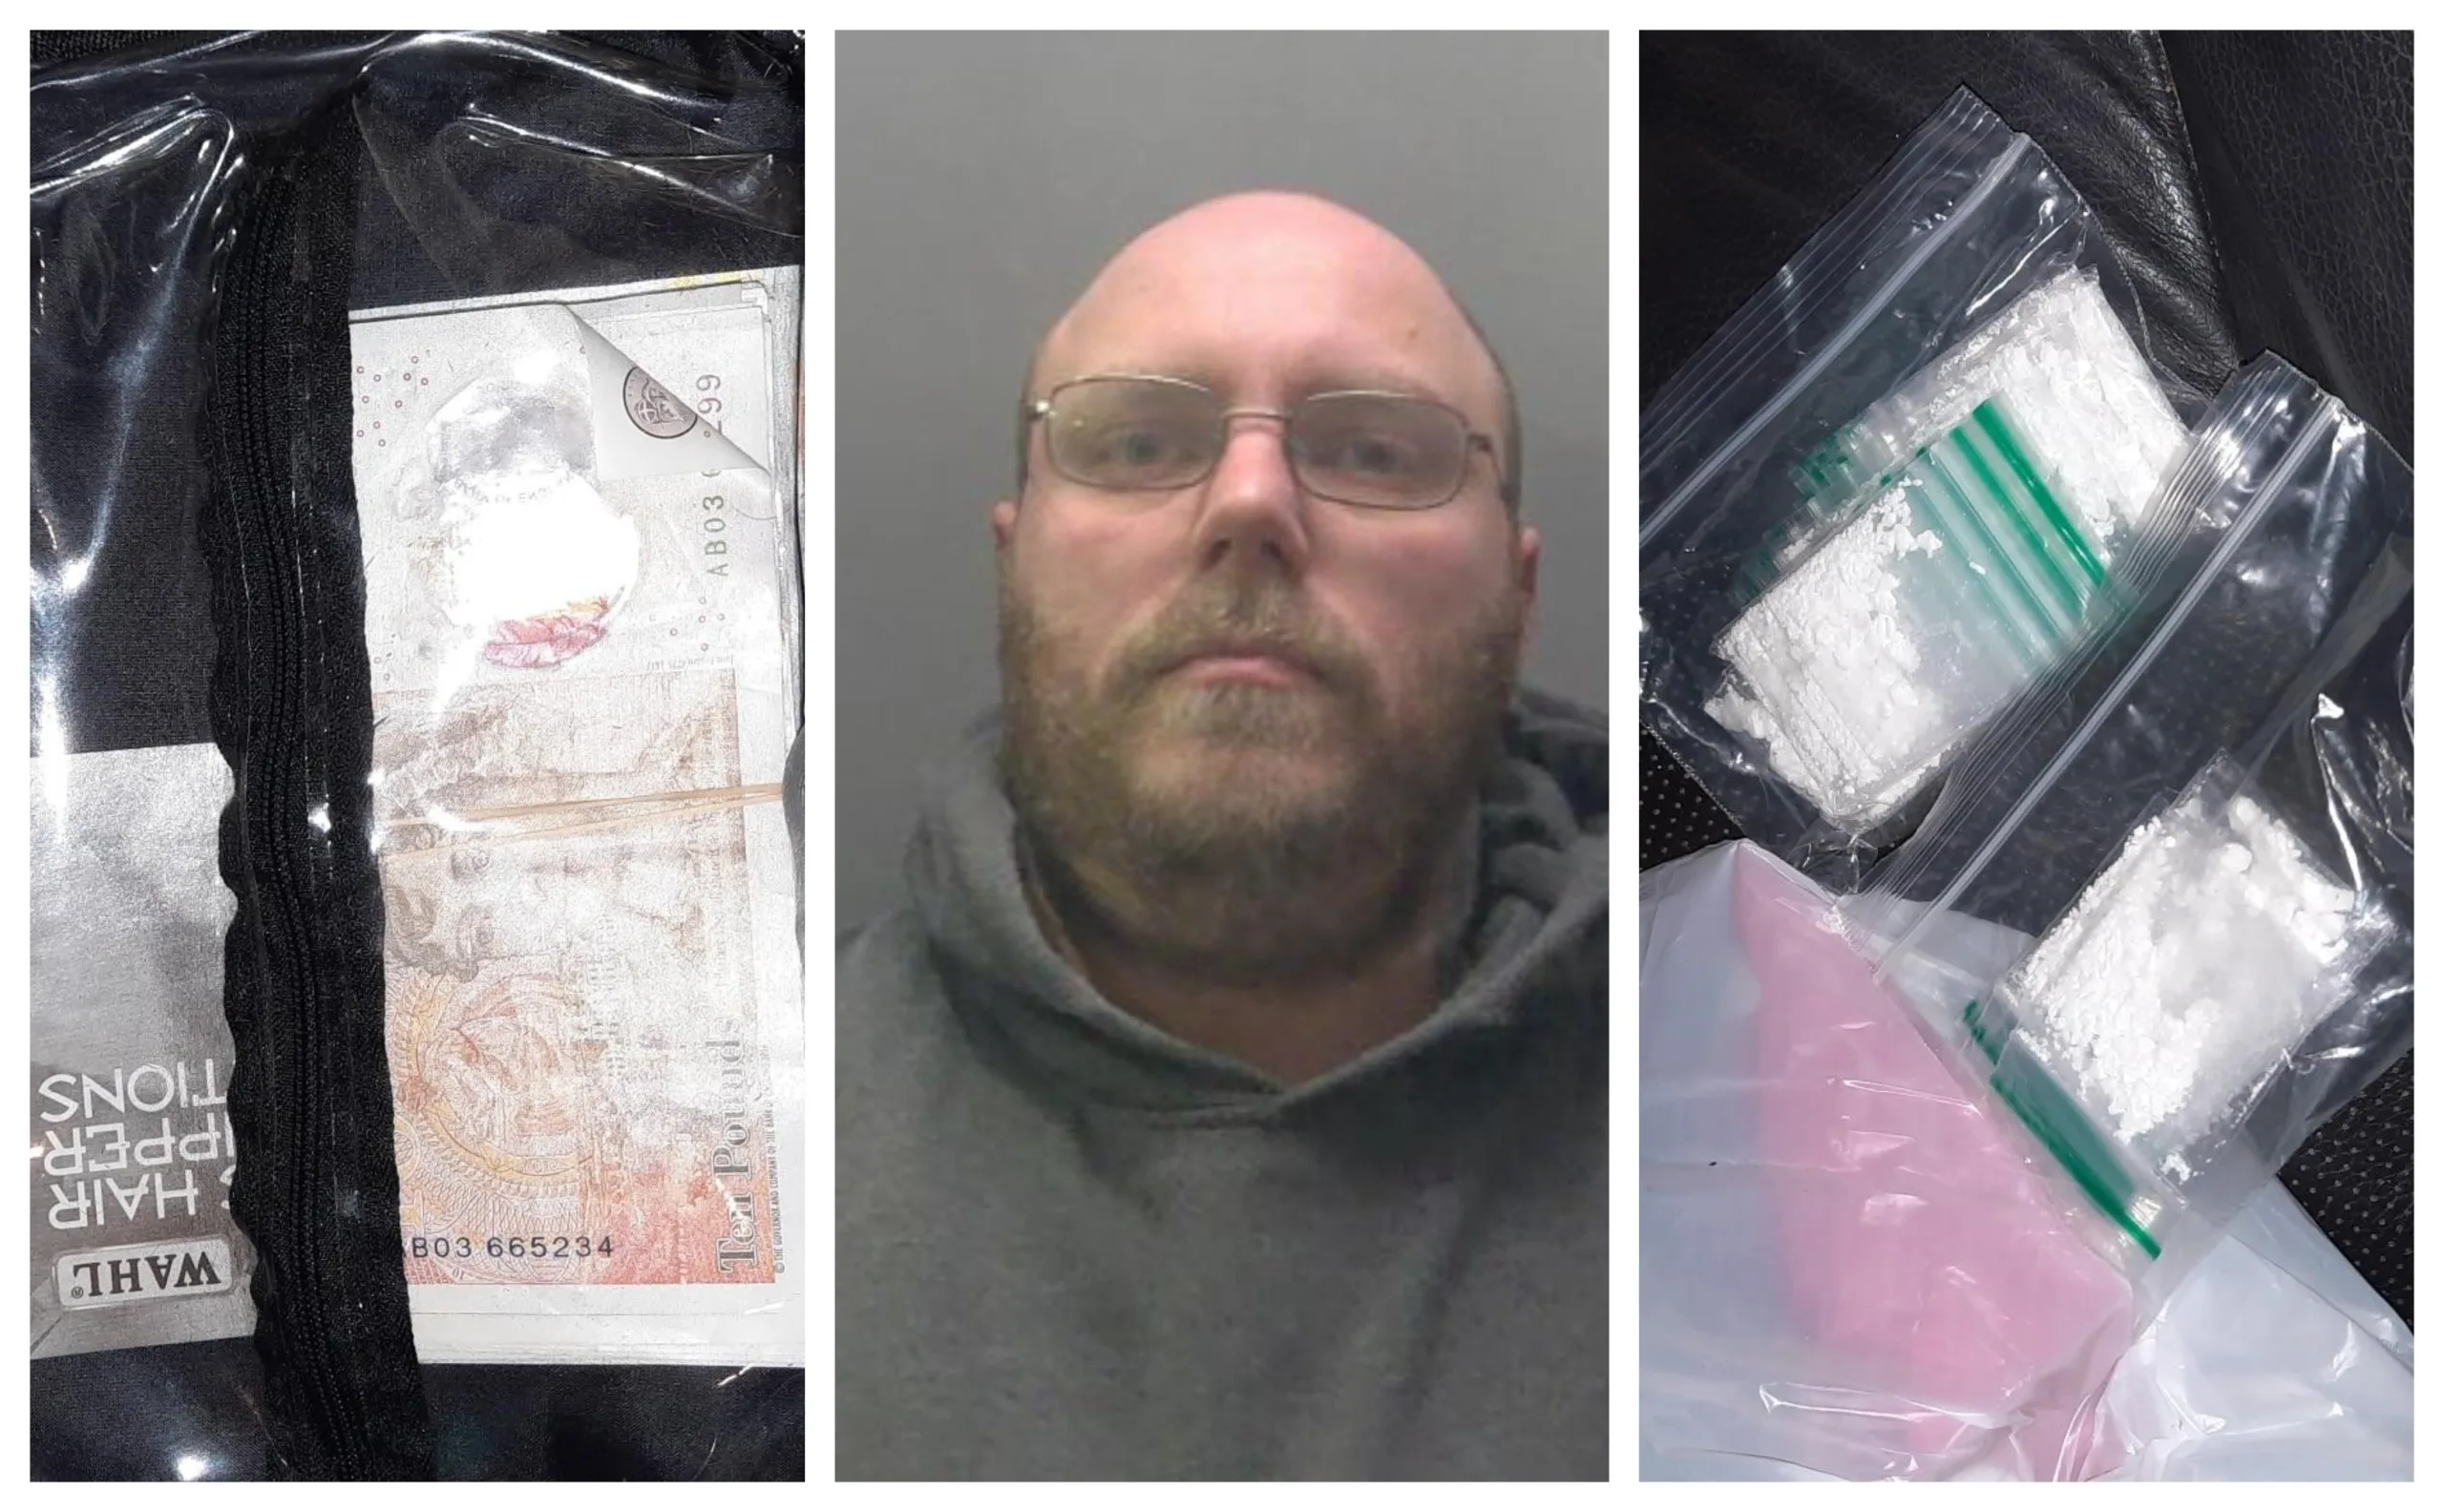 Lee Welsford, jailed, and photographs of drugs and cash seized by Cambridgeshire police.